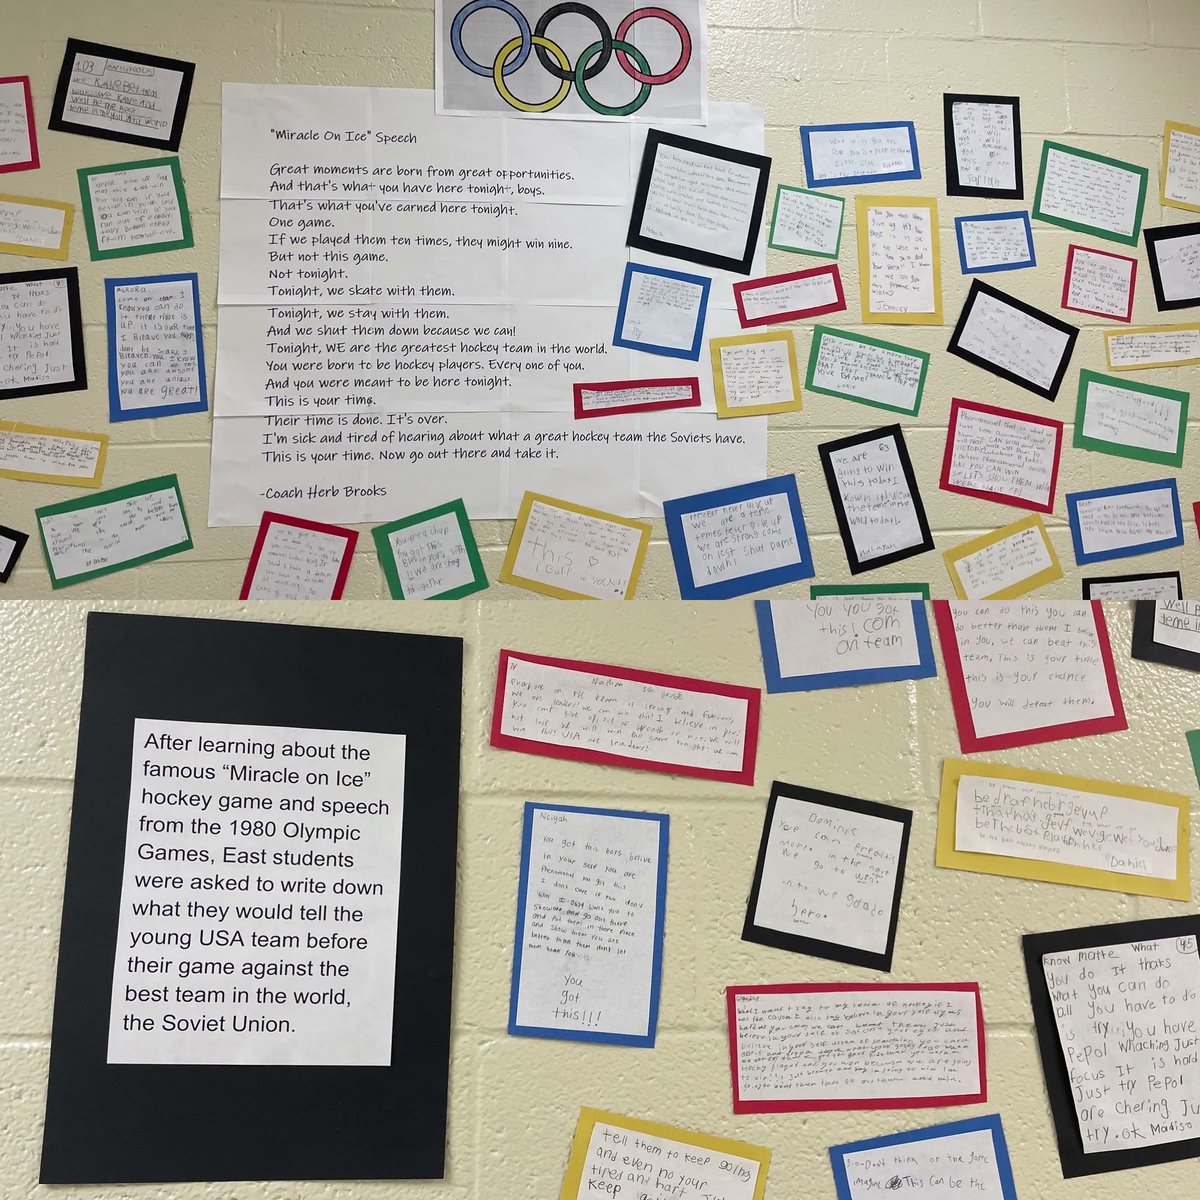 Miracle on Ice inspiring our young writers! @AGHoulihan @Renee_McKinnon1 @UCPSNC @DennyFerguson2 https://t.co/zCyCOdPXm5